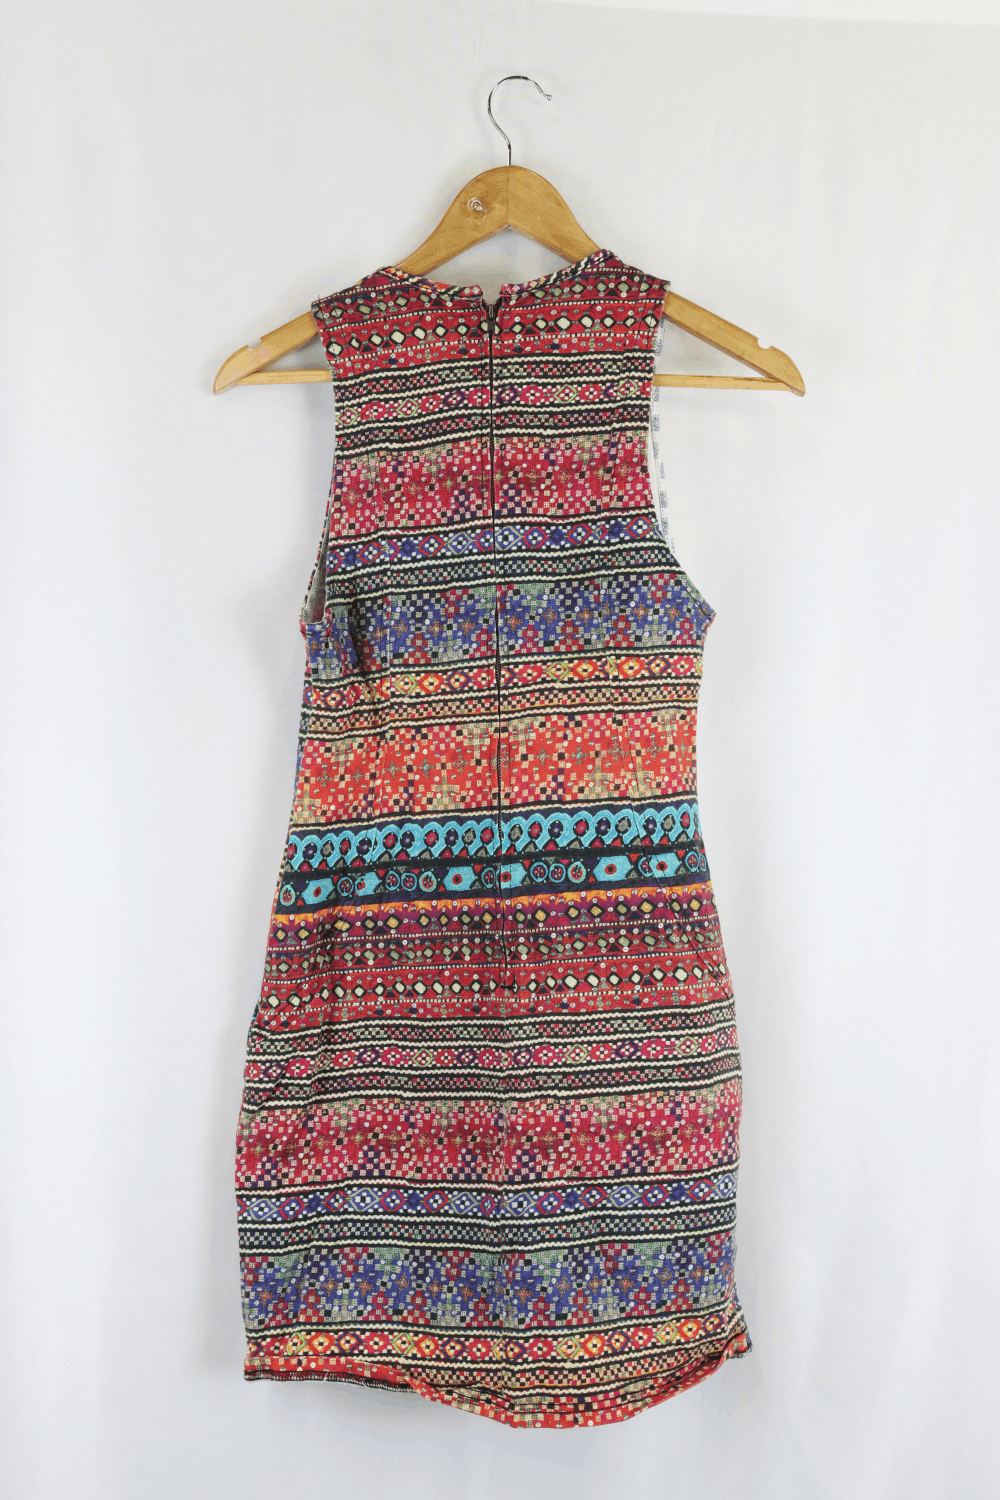 Tigerlilly Multicolored Dress10